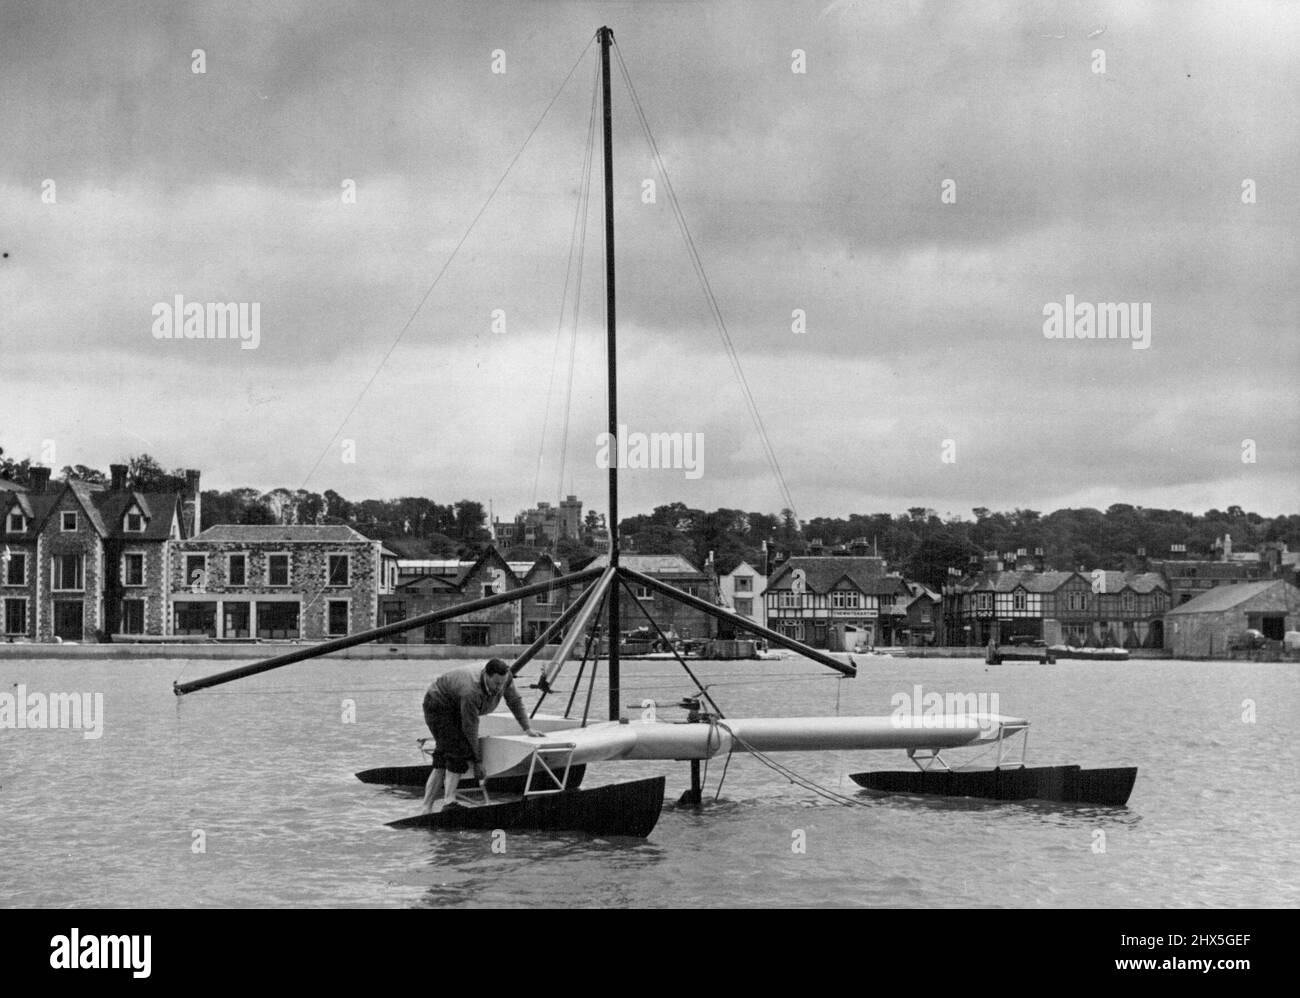 'Helicopter' Yacht Begins Trials At Cowes -- Mr. H.M. Barkla, designer of the Triscaph 'Trion' seen making adjustments to one of the vessel's floats at her moorings off Cowes, where she is now undergoing trials. Almost ready for launching at the Cowes (Isle of Wight) Corinthian Yacht Club is the Triscaph yacht 'Trion', a revolutionary-designed vessel, which resembles a floating helicopter. It is the design of Mr. H.M. Barkla, a physicist at St. Andrews University and an enthusiastic yachtsman, who is a member of the Royal Tay Yacht Club and the Cambridge Cruising Club. July 30, 1954. (Photo by Stock Photo